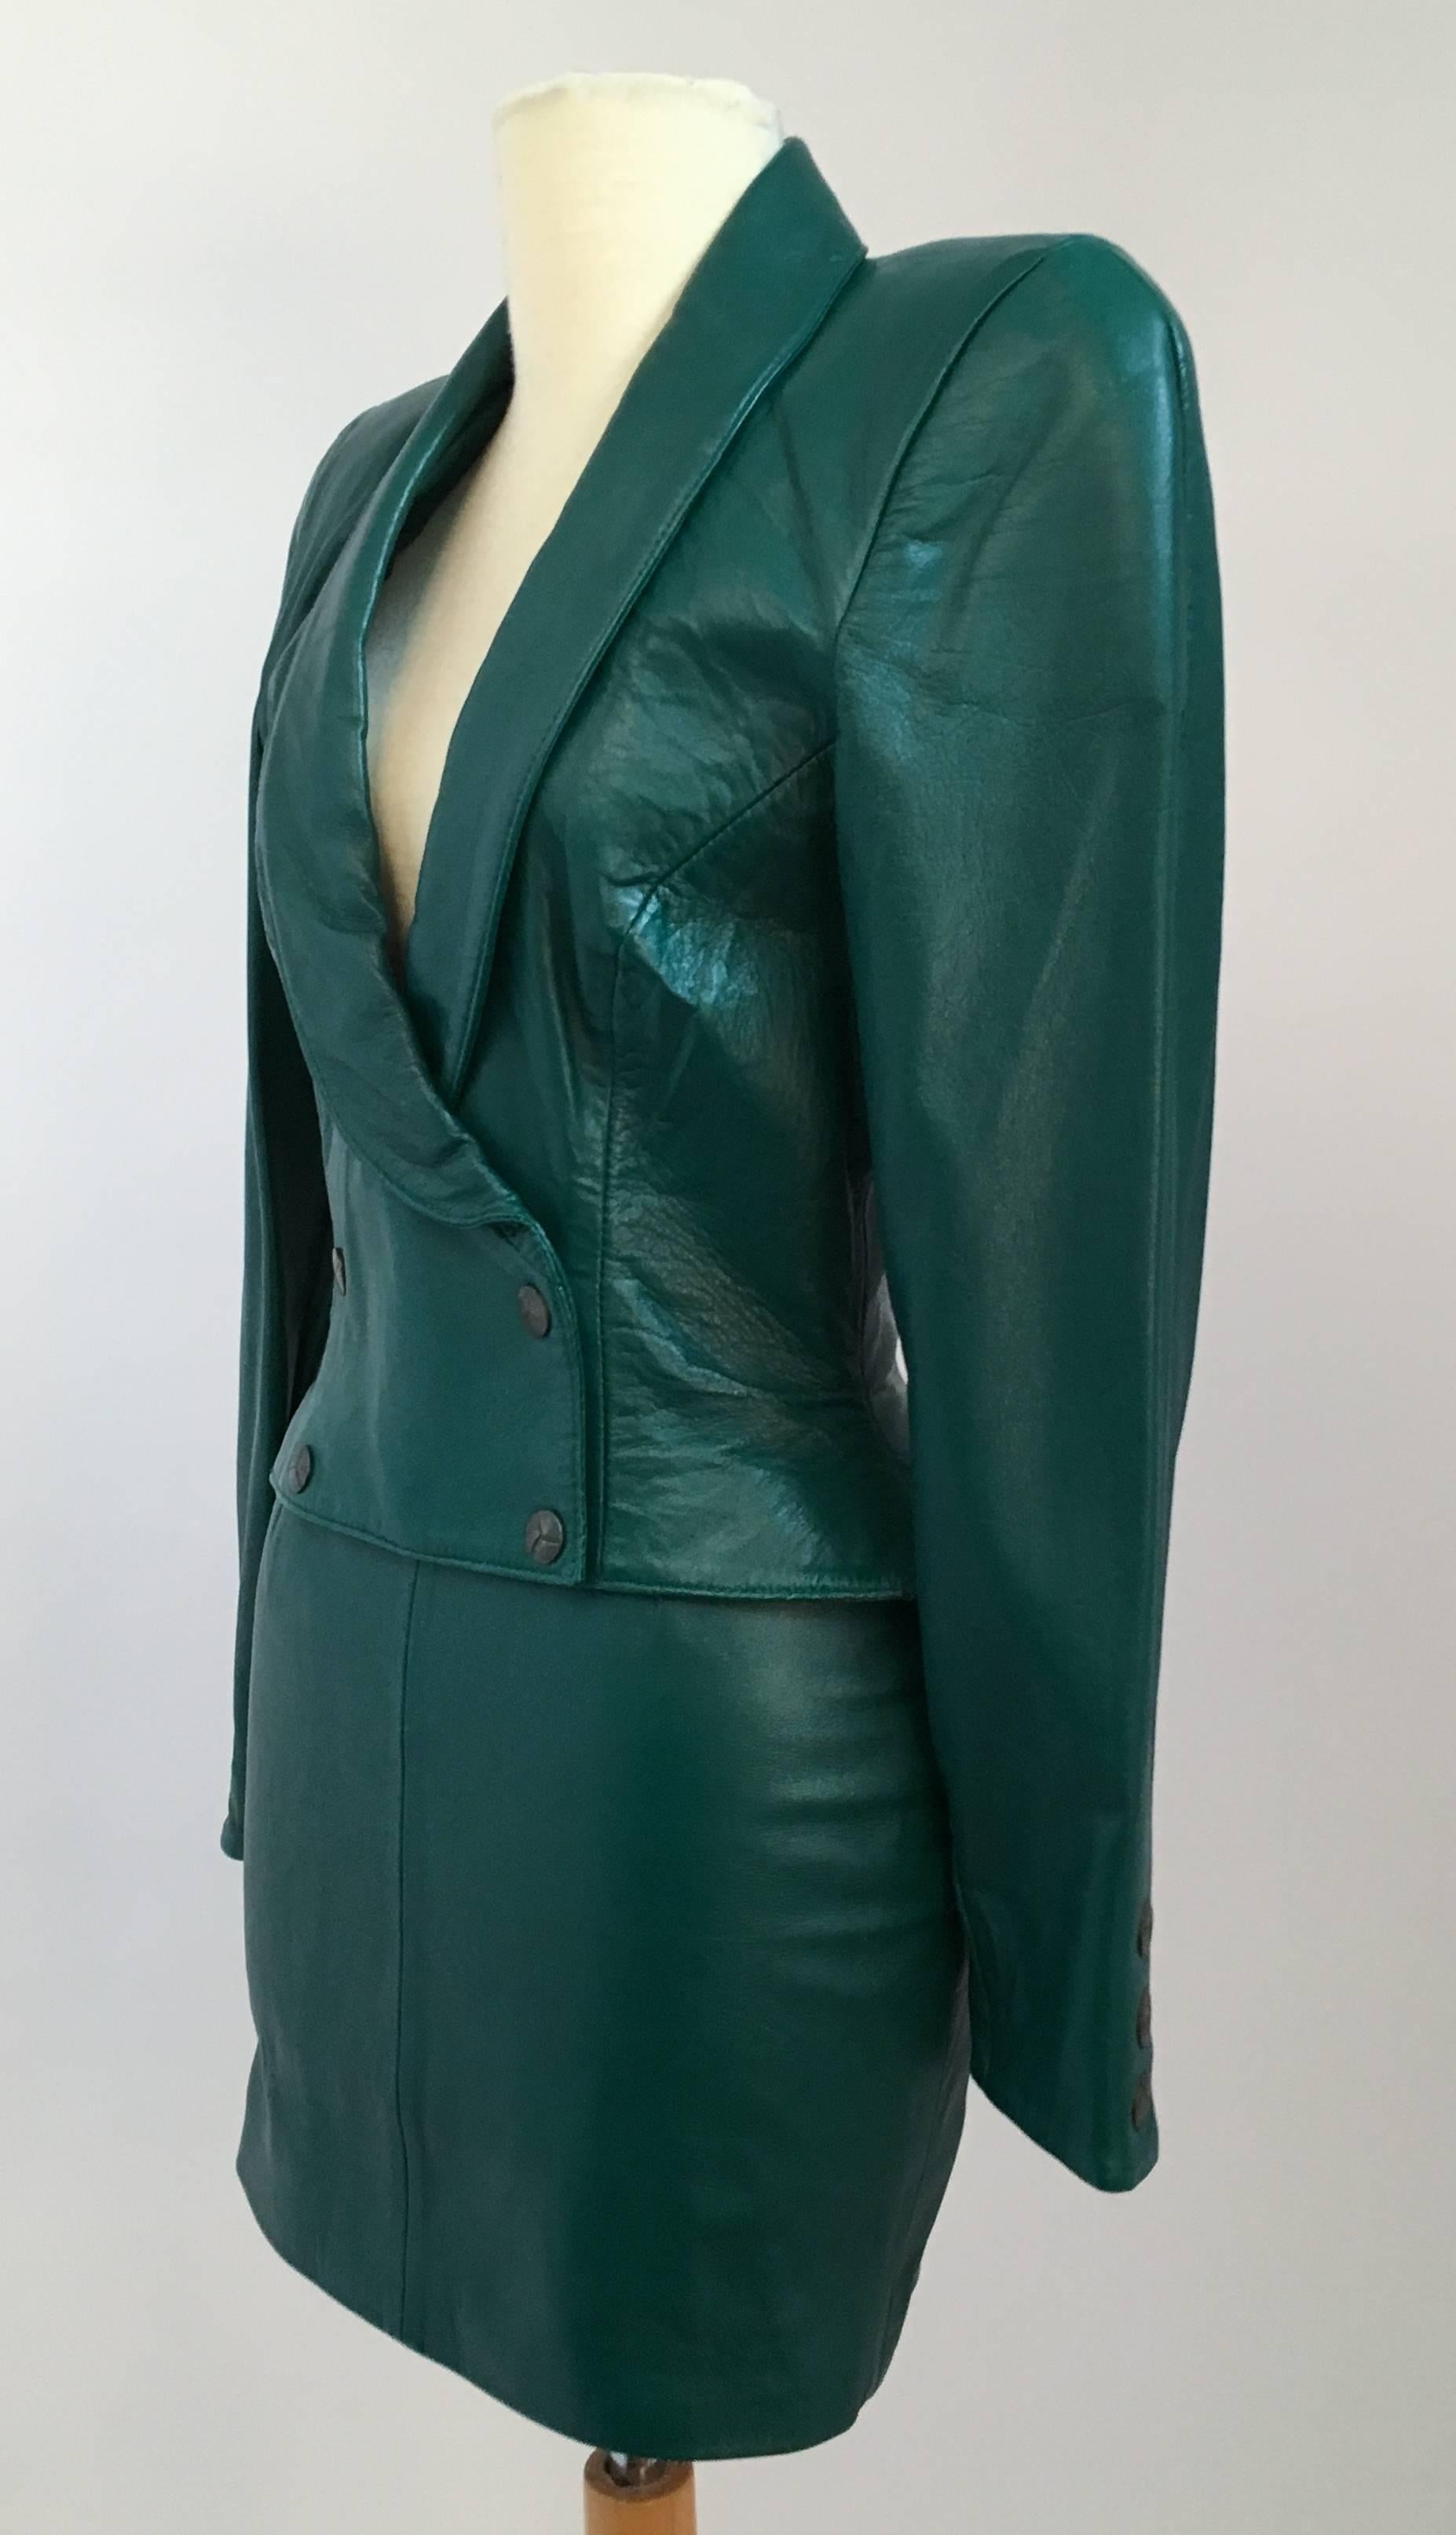 80s Michael Hoban North Beach Leather Emerald Green Jacket and Mini Skirt Set. Double breasted jacket with shawl collar and back buckle detail at waist. Miniskirt zips up back.